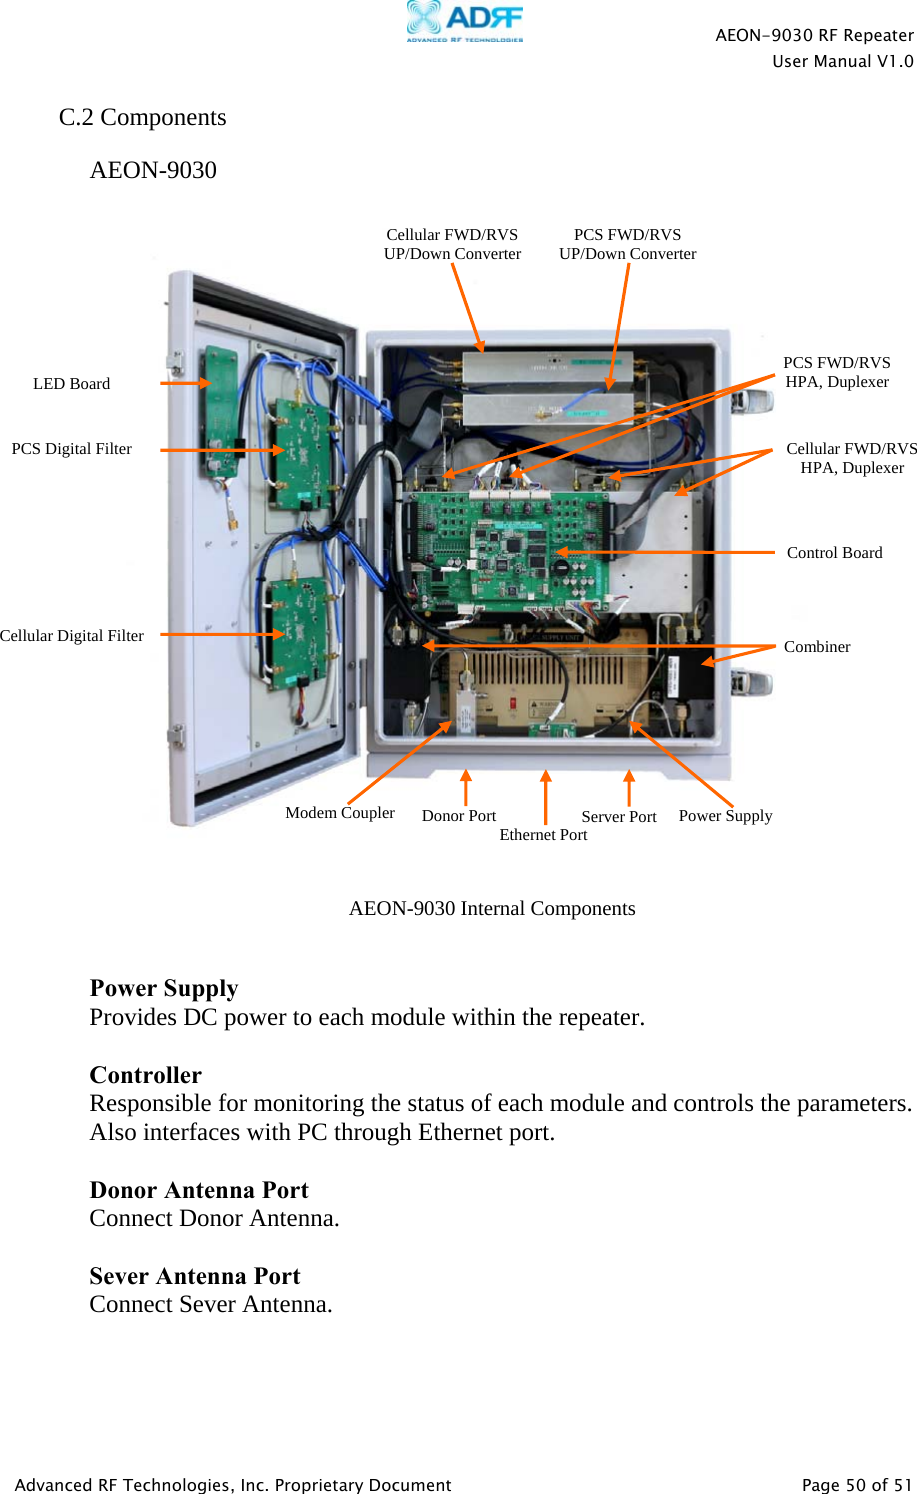   AEON-9030 RF Repeater User Manual V1.0  Advanced RF Technologies, Inc. Proprietary Document   Page 50 of 51   C.2 Components   AEON-9030       Power Supply Provides DC power to each module within the repeater.  Controller Responsible for monitoring the status of each module and controls the parameters. Also interfaces with PC through Ethernet port.  Donor Antenna Port Connect Donor Antenna.  Sever Antenna Port Connect Sever Antenna.     AEON-9030 Internal Components Cellular FWD/RVS UP/Down ConverterPCS FWD/RVS UP/Down ConverterDonor Port  Server PortControl Board Ethernet Port Power Supply Combiner Cellular Digital Filter PCS Digital Filter LED Board PCS FWD/RVS HPA, Duplexer Cellular FWD/RVS HPA, Duplexer Modem Coupler